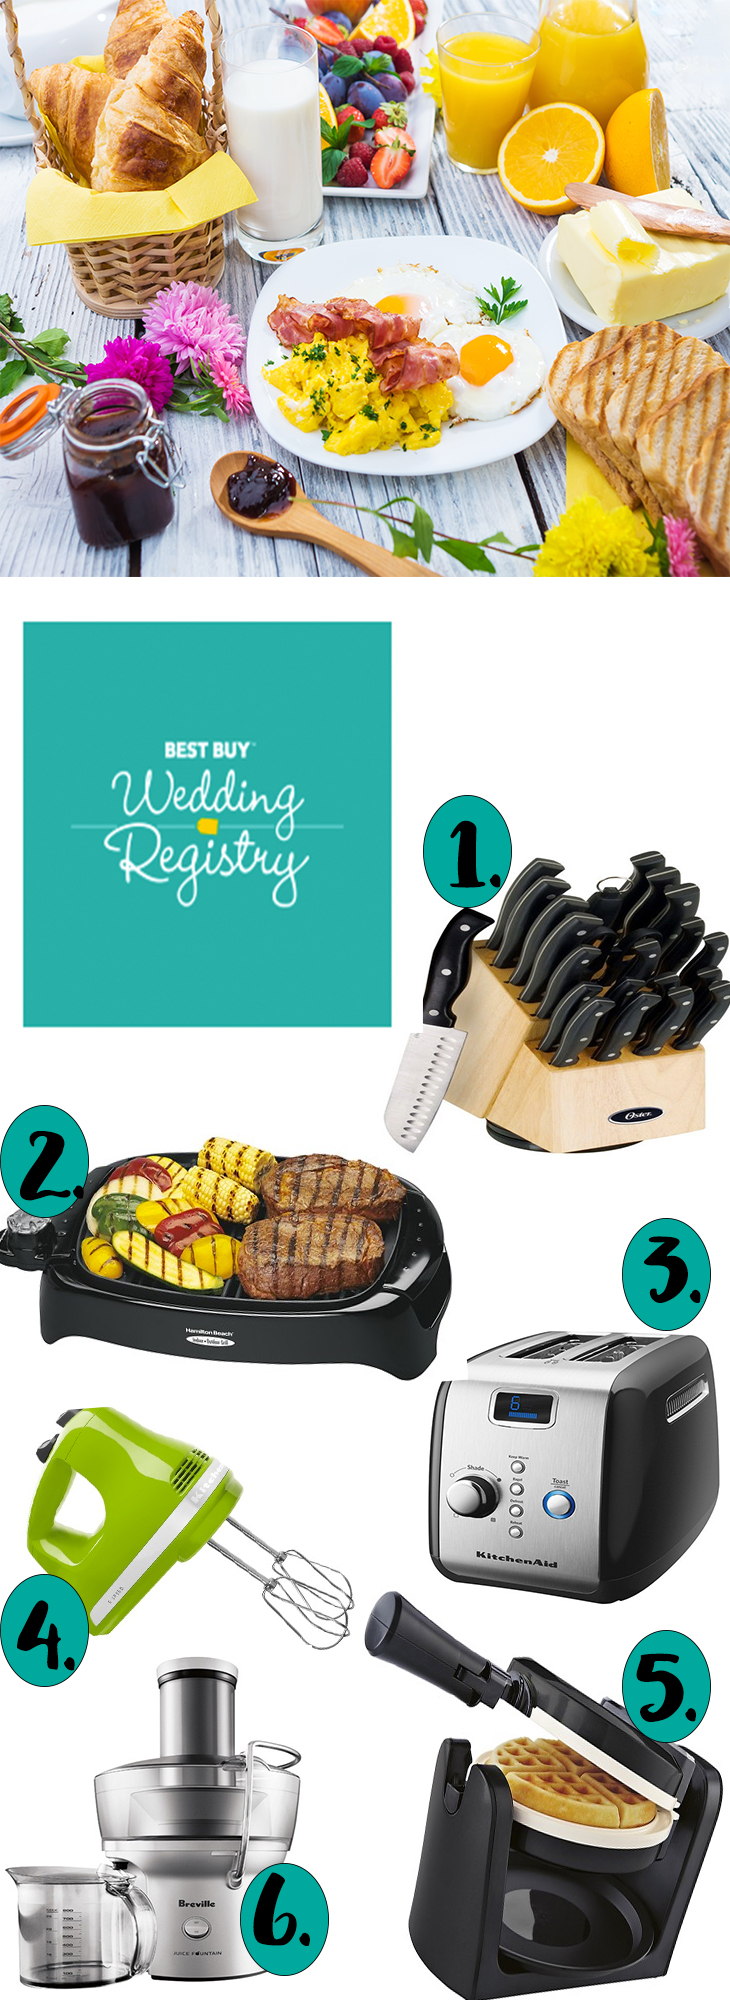 Register for the Mornings After the Wedding with the Best Buy Wedding Registry